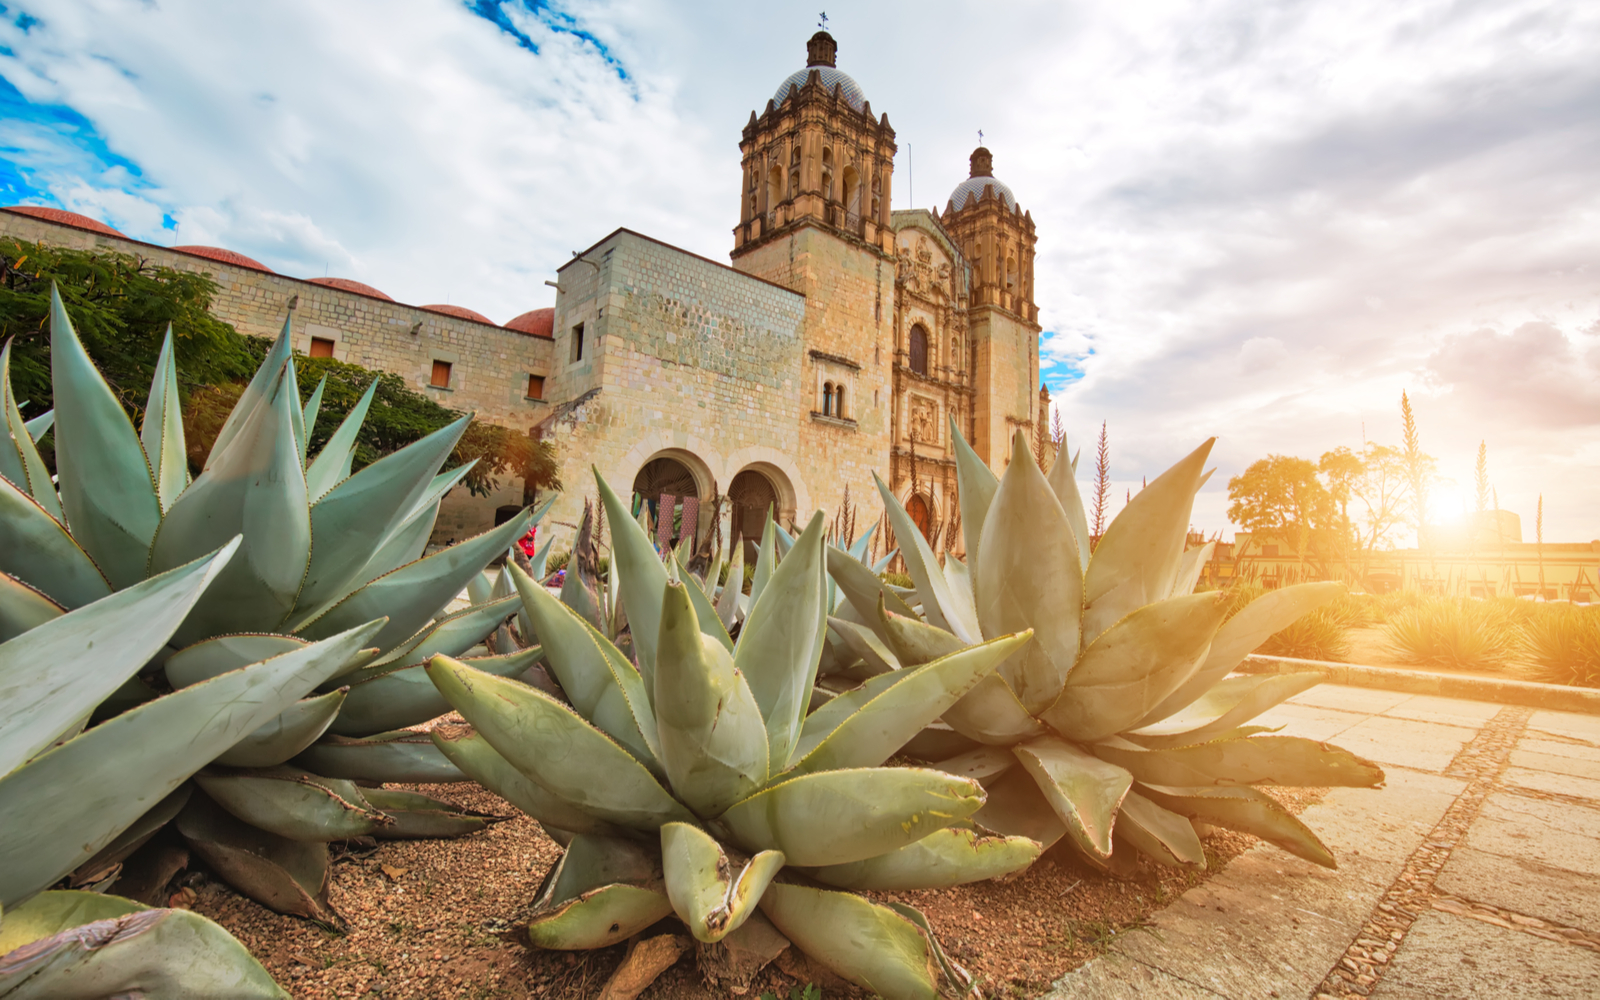 Is Oaxaca Safe? | Travel Tips & Safety Concerns